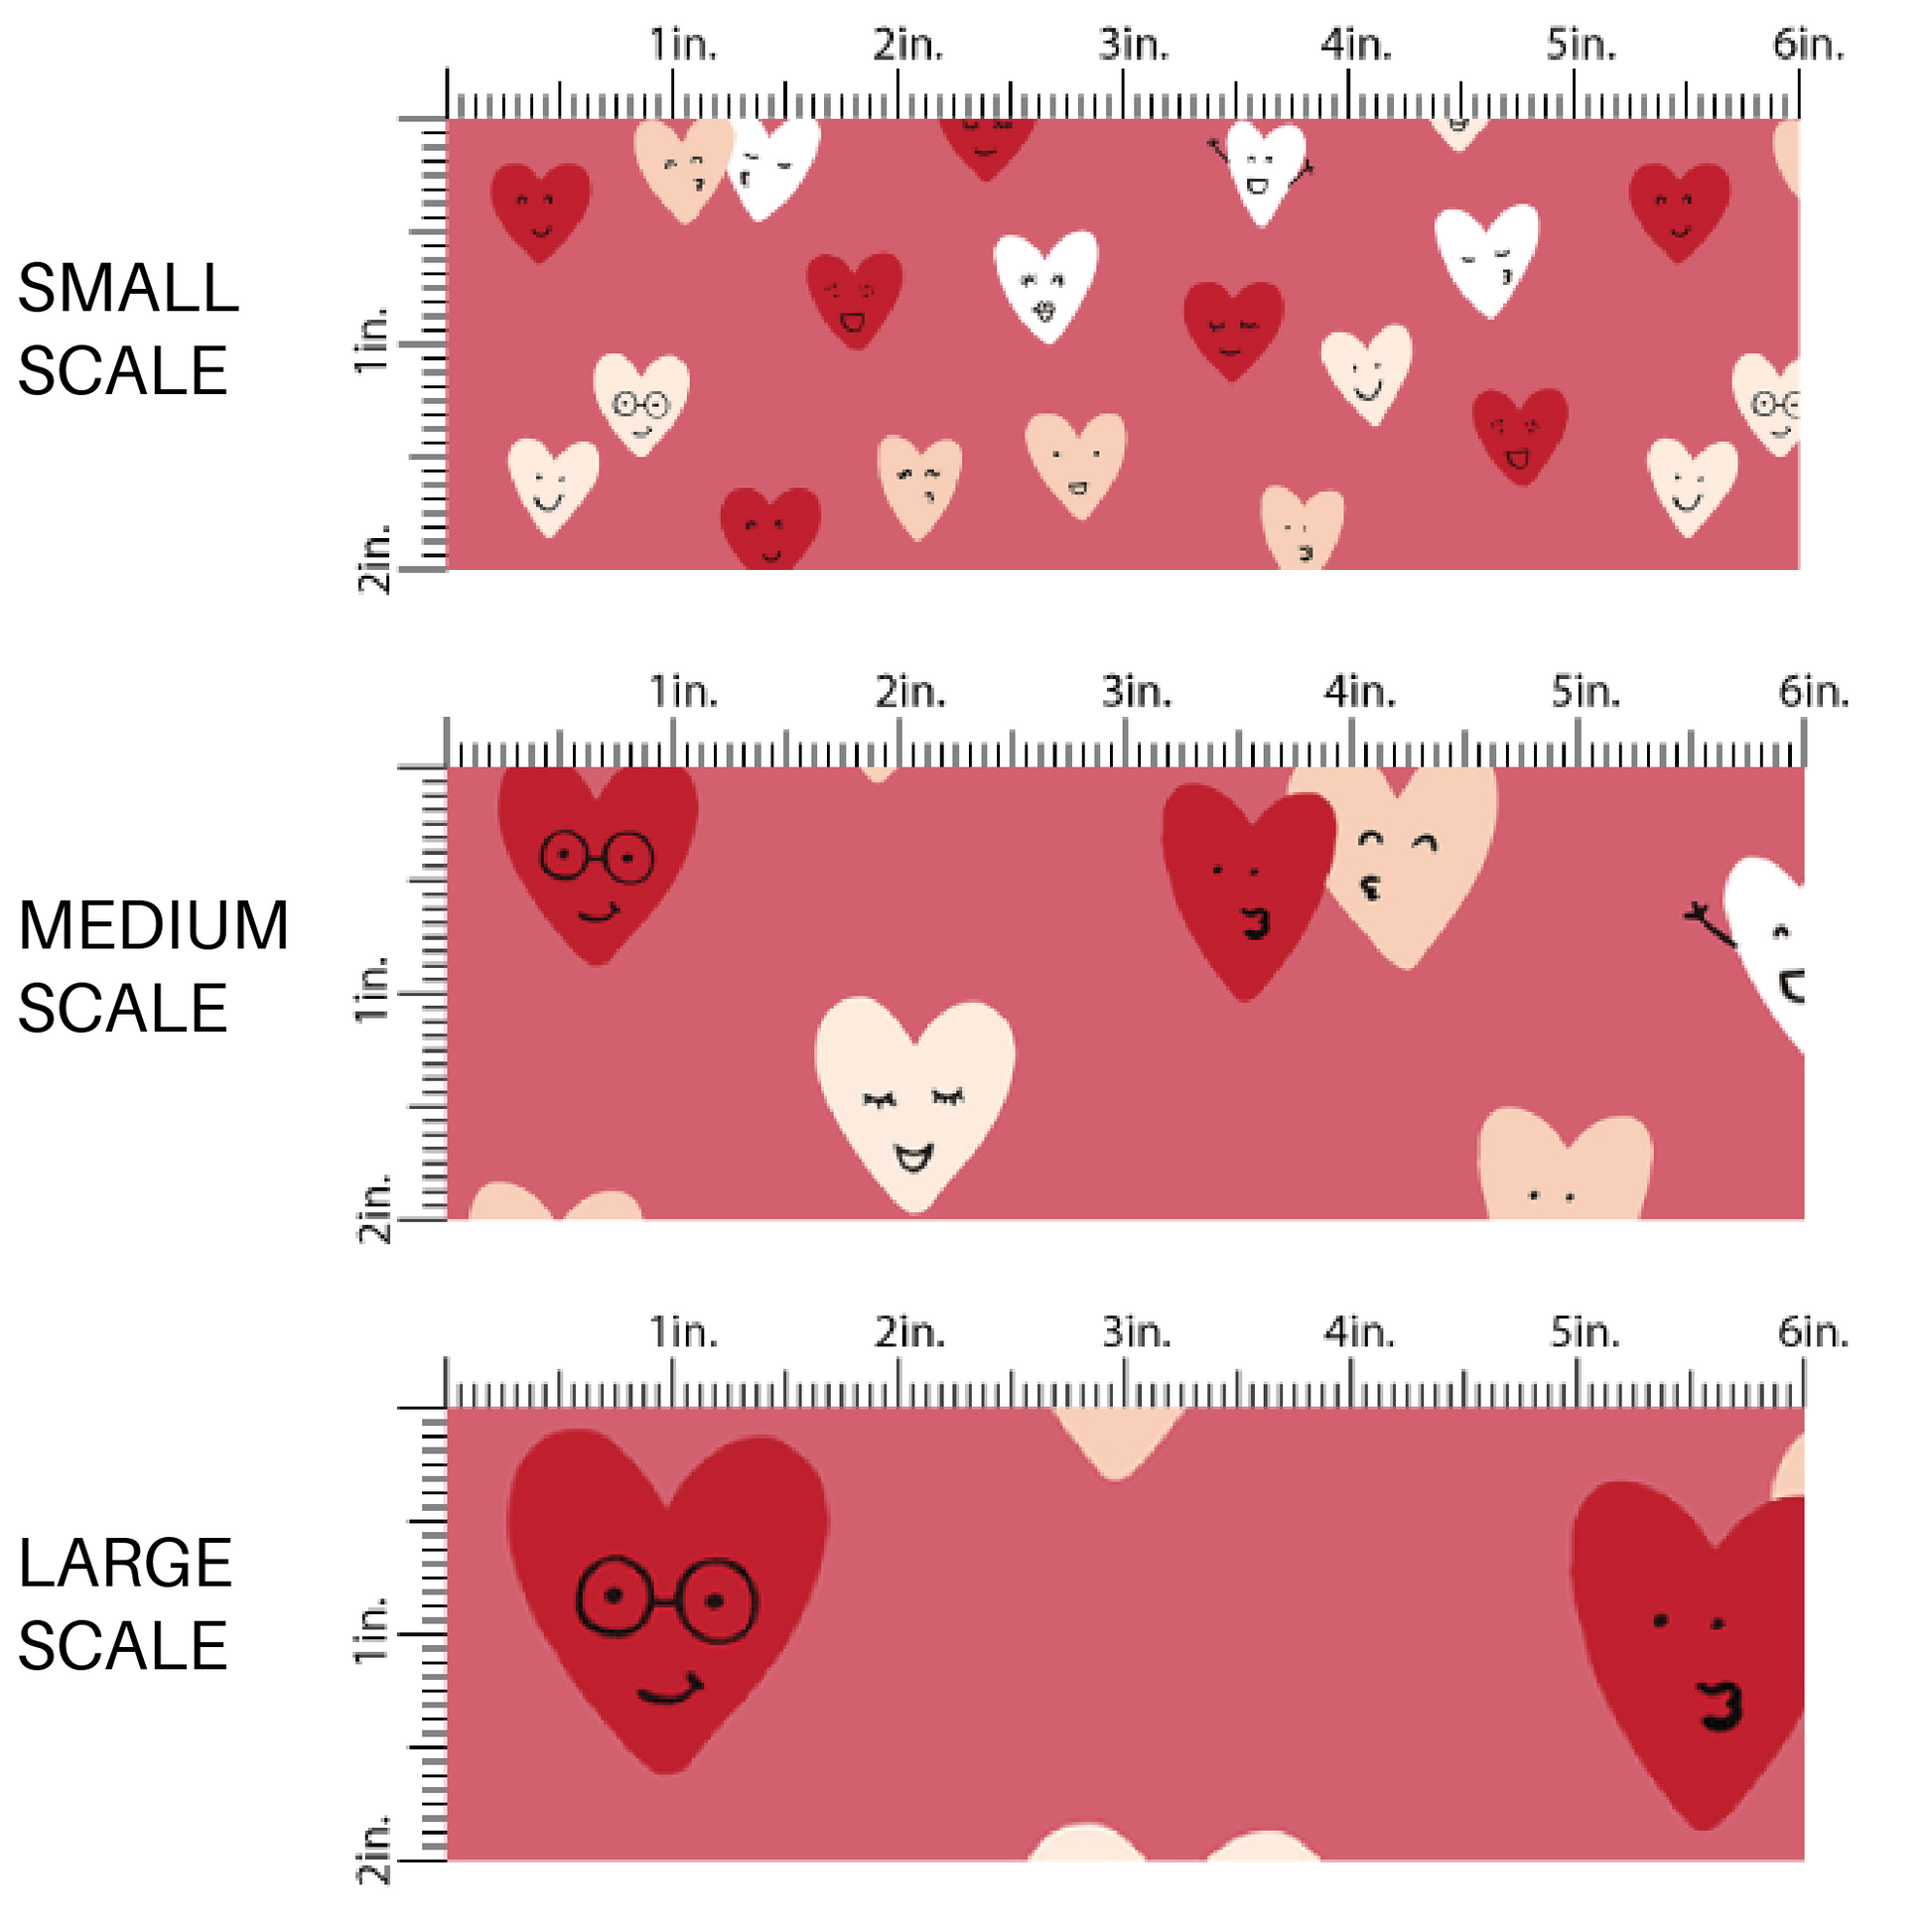 Scaling for Magenta colored fabric with animated red and white hearts